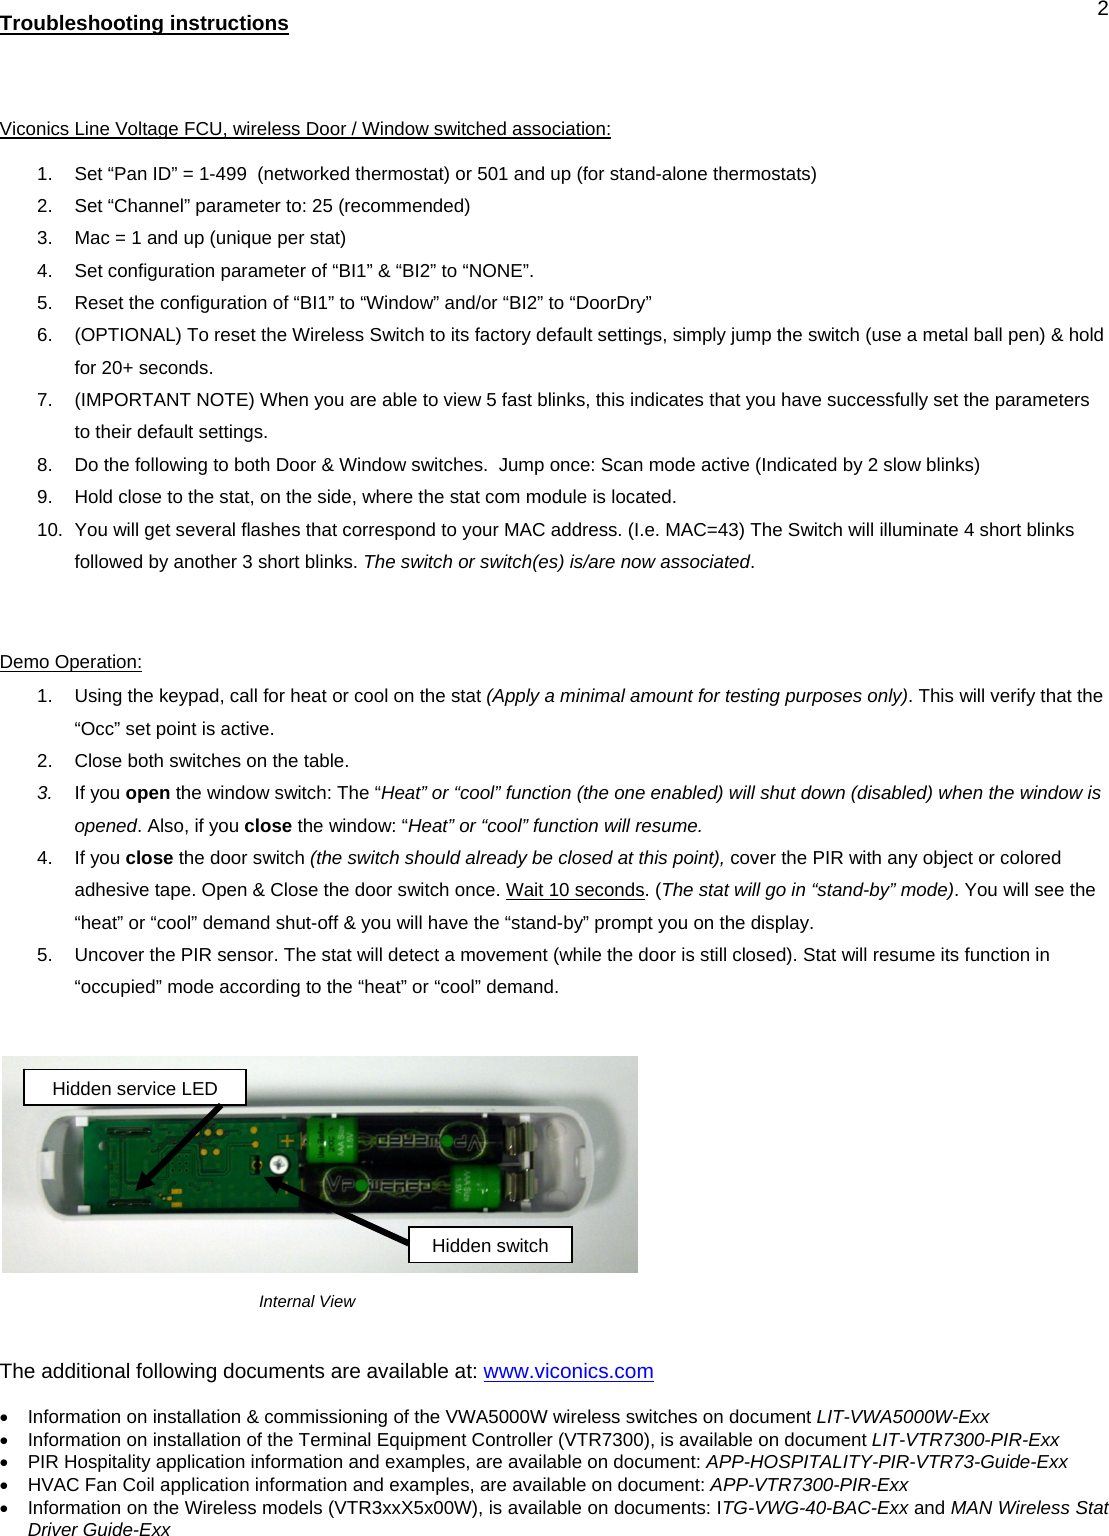  2Troubleshooting instructions   Viconics Line Voltage FCU, wireless Door / Window switched association: 1.  Set “Pan ID” = 1-499  (networked thermostat) or 501 and up (for stand-alone thermostats) 2.  Set “Channel” parameter to: 25 (recommended) 3.  Mac = 1 and up (unique per stat) 4.  Set configuration parameter of “BI1” &amp; “BI2” to “NONE”. 5.  Reset the configuration of “BI1” to “Window” and/or “BI2” to “DoorDry” 6.  (OPTIONAL) To reset the Wireless Switch to its factory default settings, simply jump the switch (use a metal ball pen) &amp; hold for 20+ seconds. 7.  (IMPORTANT NOTE) When you are able to view 5 fast blinks, this indicates that you have successfully set the parameters to their default settings. 8.  Do the following to both Door &amp; Window switches.  Jump once: Scan mode active (Indicated by 2 slow blinks) 9.  Hold close to the stat, on the side, where the stat com module is located. 10.  You will get several flashes that correspond to your MAC address. (I.e. MAC=43) The Switch will illuminate 4 short blinks followed by another 3 short blinks. The switch or switch(es) is/are now associated.   Demo Operation: 1.  Using the keypad, call for heat or cool on the stat (Apply a minimal amount for testing purposes only). This will verify that the “Occ” set point is active. 2.  Close both switches on the table. 3.  If you open the window switch: The “Heat” or “cool” function (the one enabled) will shut down (disabled) when the window is opened. Also, if you close the window: “Heat” or “cool” function will resume. 4. If you close the door switch (the switch should already be closed at this point), cover the PIR with any object or colored adhesive tape. Open &amp; Close the door switch once. Wait 10 seconds. (The stat will go in “stand-by” mode). You will see the “heat” or “cool” demand shut-off &amp; you will have the “stand-by” prompt you on the display. 5.  Uncover the PIR sensor. The stat will detect a movement (while the door is still closed). Stat will resume its function in “occupied” mode according to the “heat” or “cool” demand.                                                             Internal View   The additional following documents are available at: www.viconics.com  •  Information on installation &amp; commissioning of the VWA5000W wireless switches on document LIT-VWA5000W-Exx •  Information on installation of the Terminal Equipment Controller (VTR7300), is available on document LIT-VTR7300-PIR-Exx •  PIR Hospitality application information and examples, are available on document: APP-HOSPITALITY-PIR-VTR73-Guide-Exx •  HVAC Fan Coil application information and examples, are available on document: APP-VTR7300-PIR-Exx •  Information on the Wireless models (VTR3xxX5x00W), is available on documents: ITG-VWG-40-BAC-Exx and MAN Wireless Stat Driver Guide-Exx   Hidden service LED Hidden switch